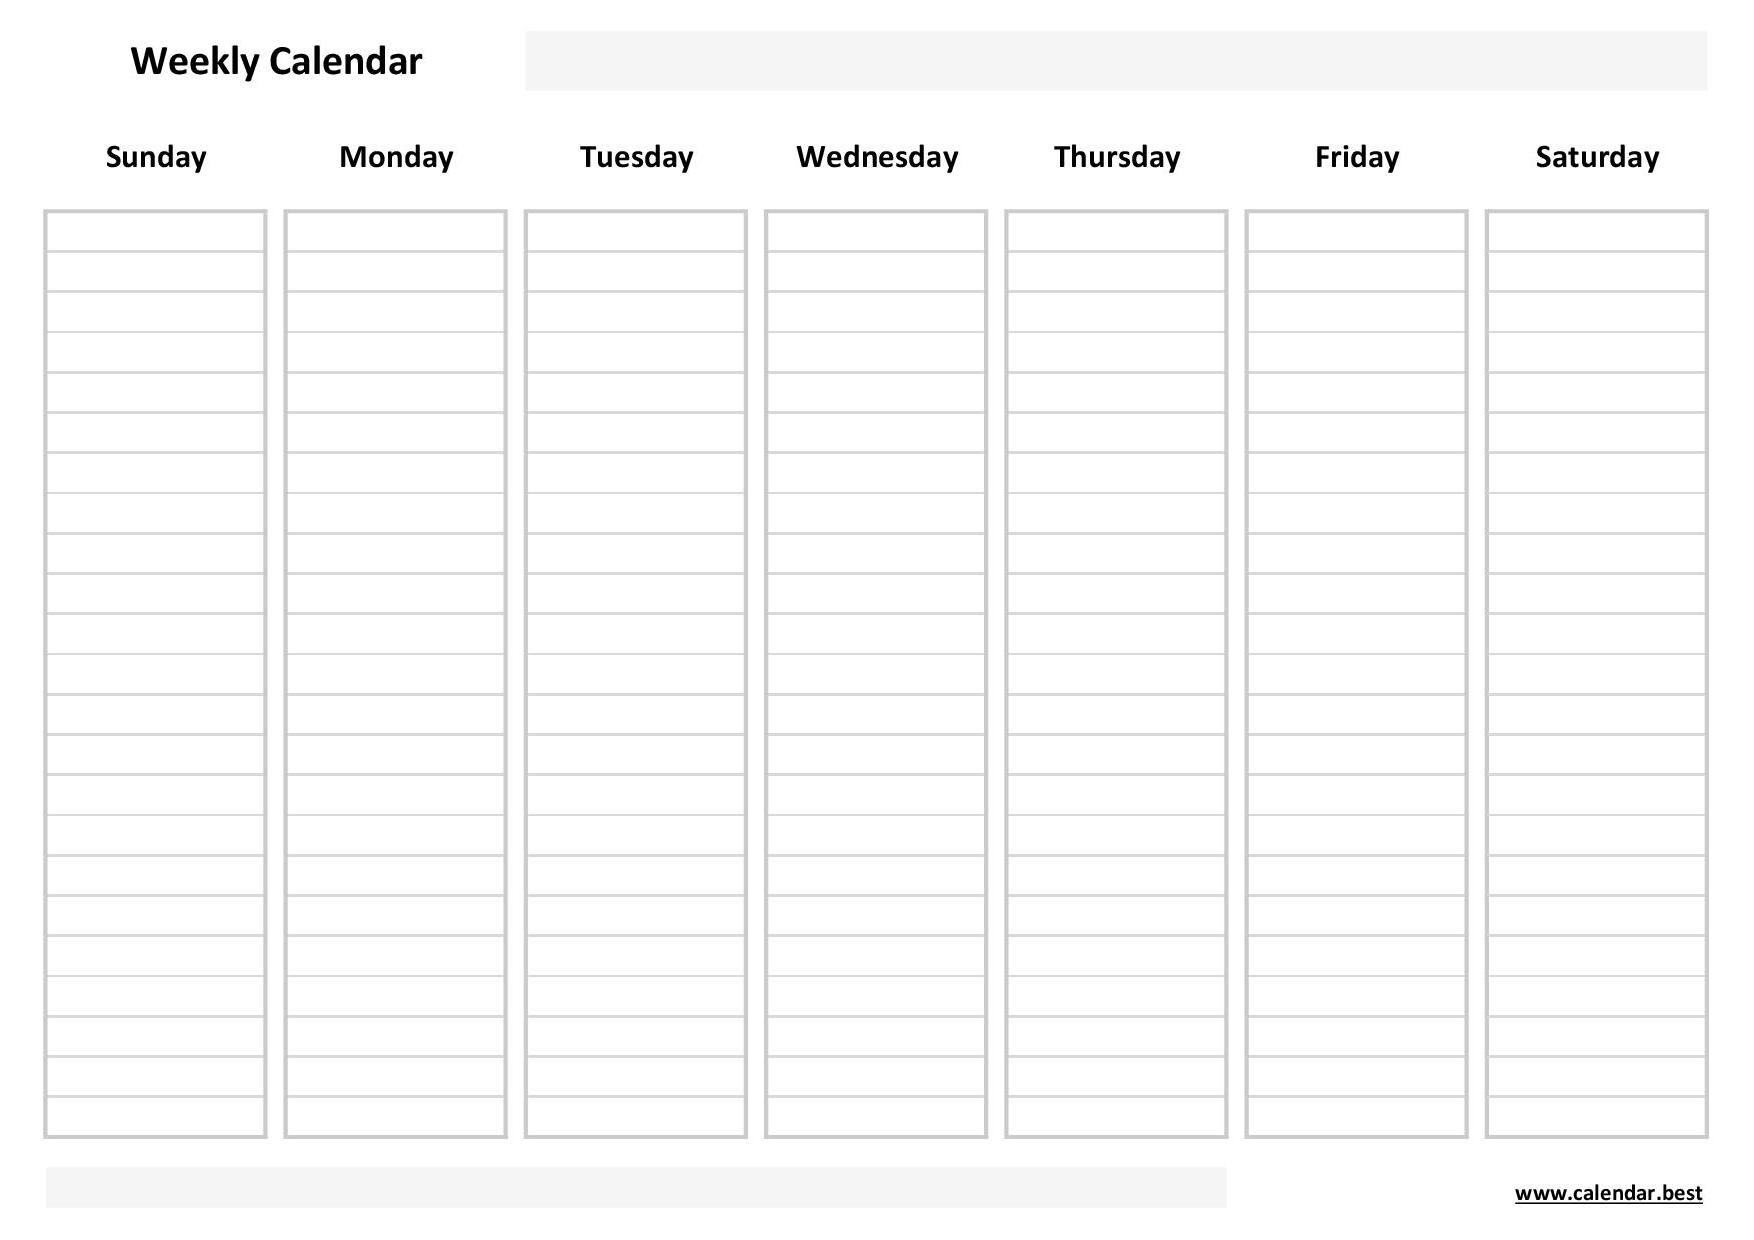 weekly-calendar-template-with-time-slots-google-search-weekly